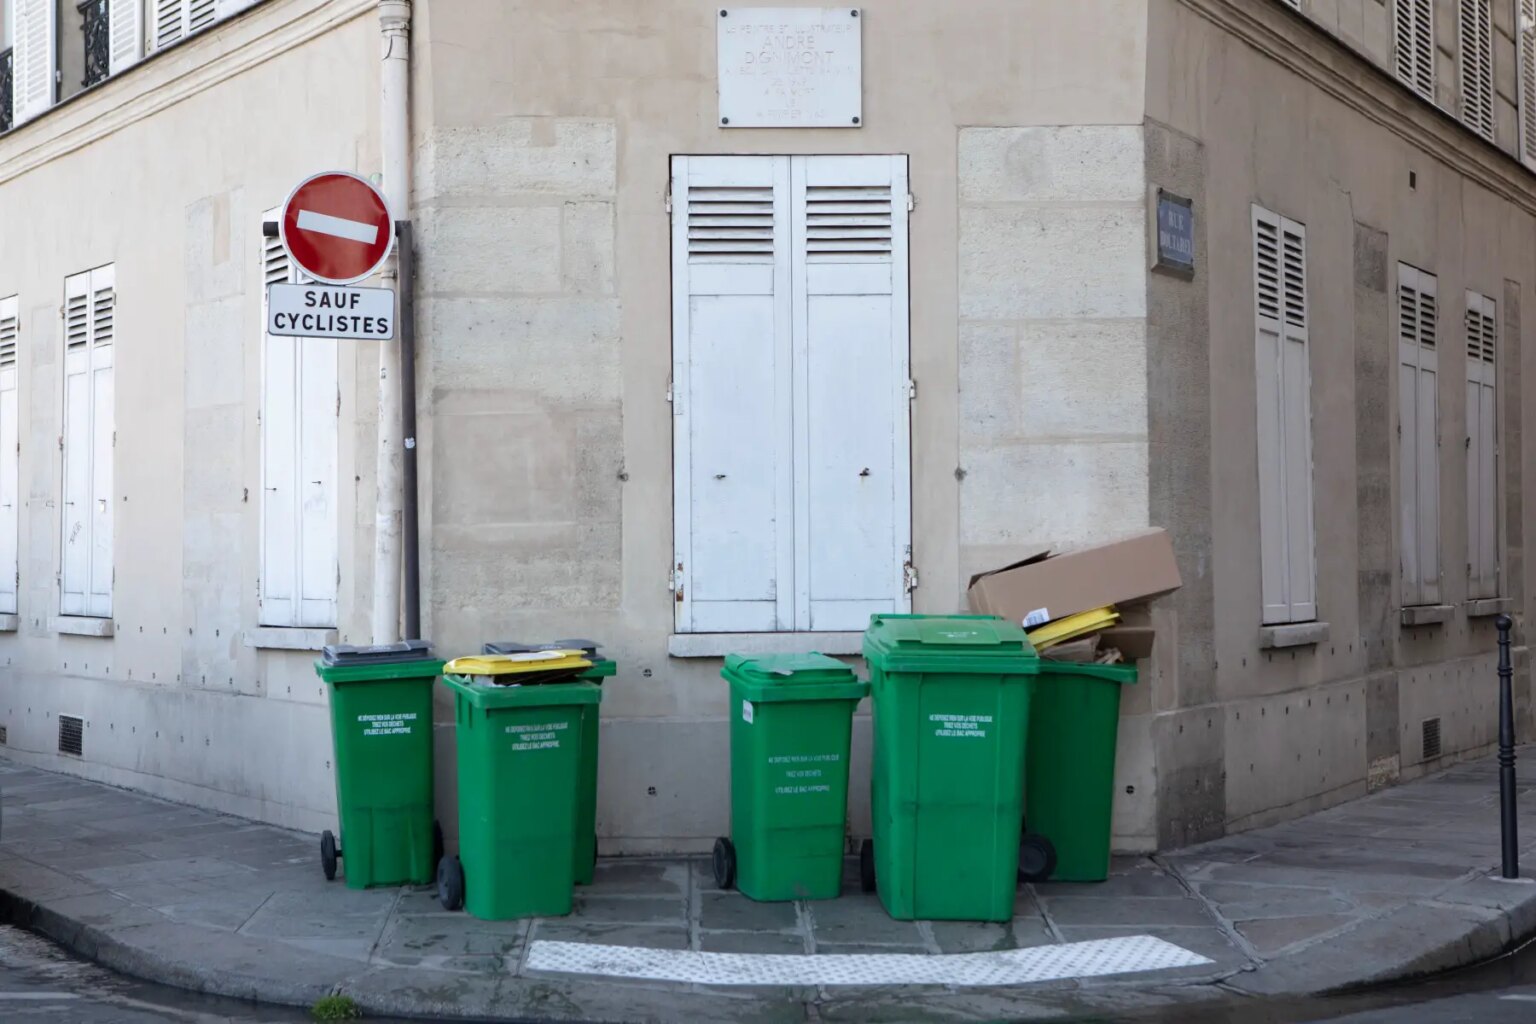 Recycling in France